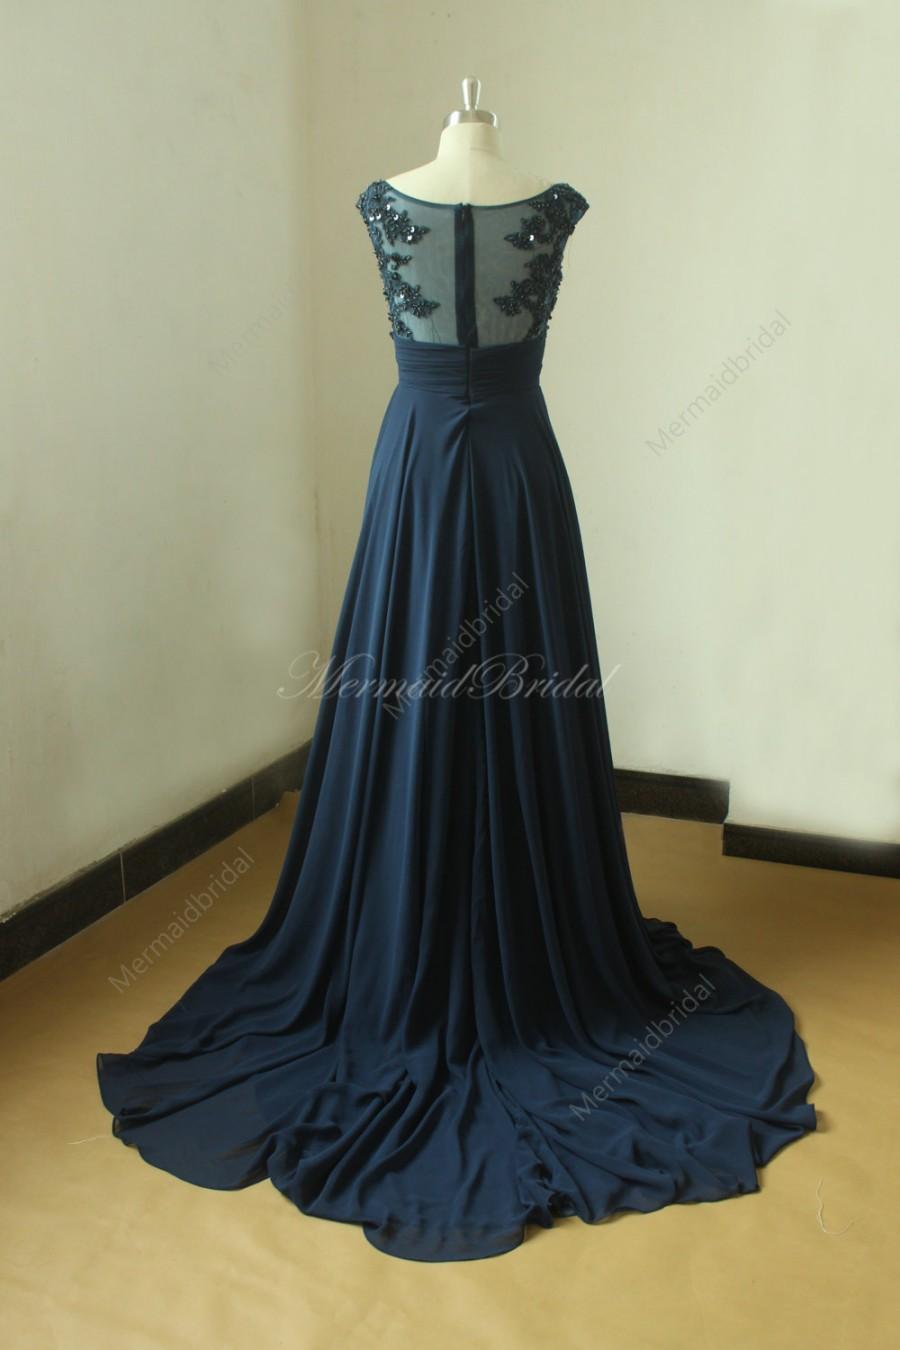 Mariage - Backless Navy blue A line chiffon lace wedding dress with illusion neckline